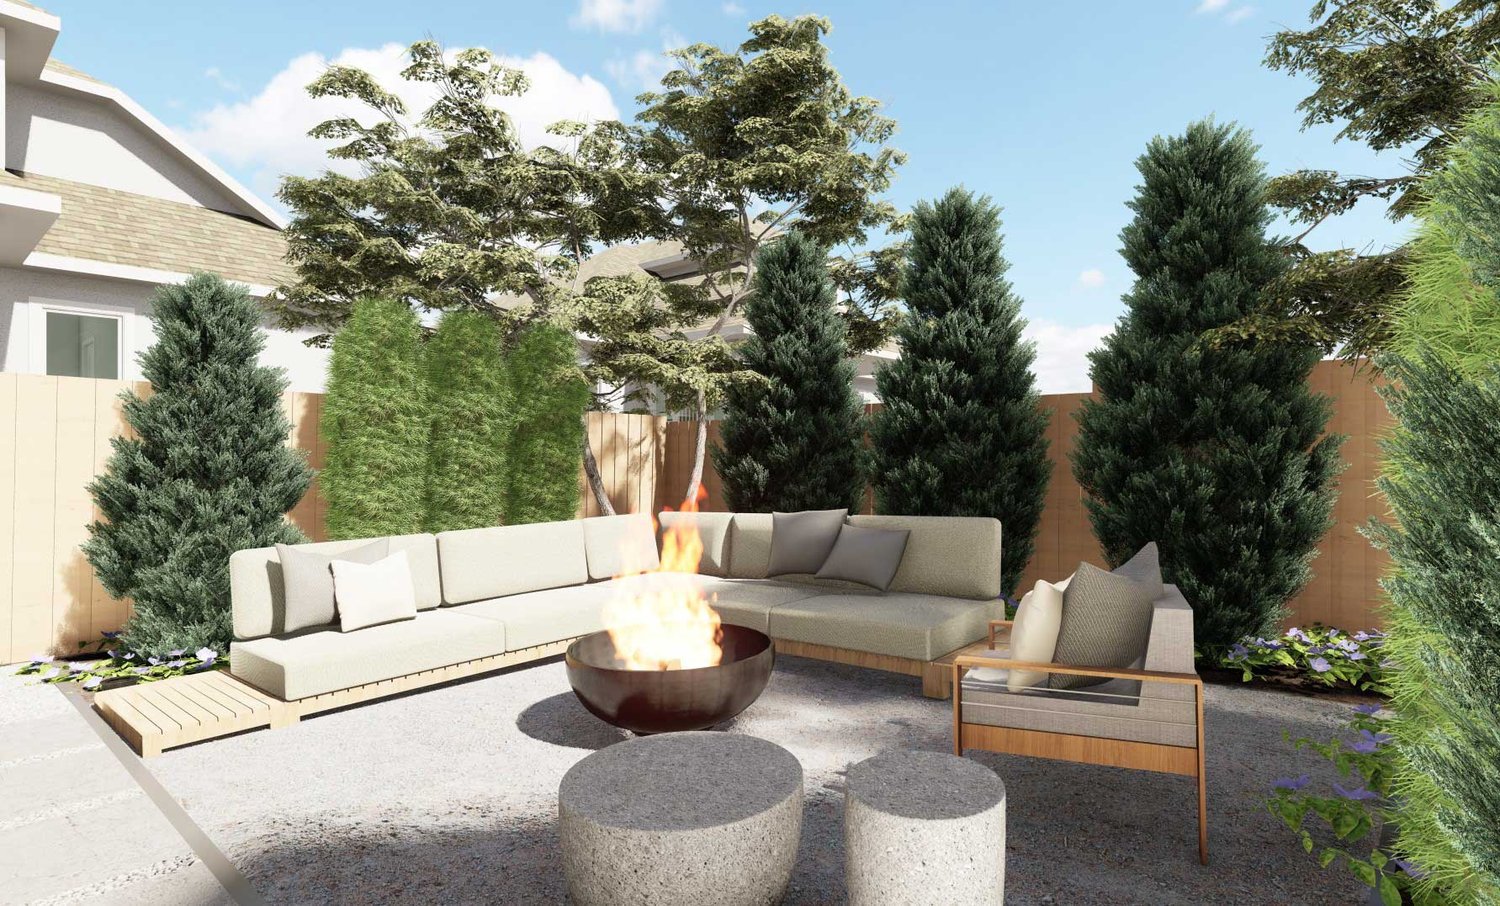 Denver backyard sitting area with fire pit